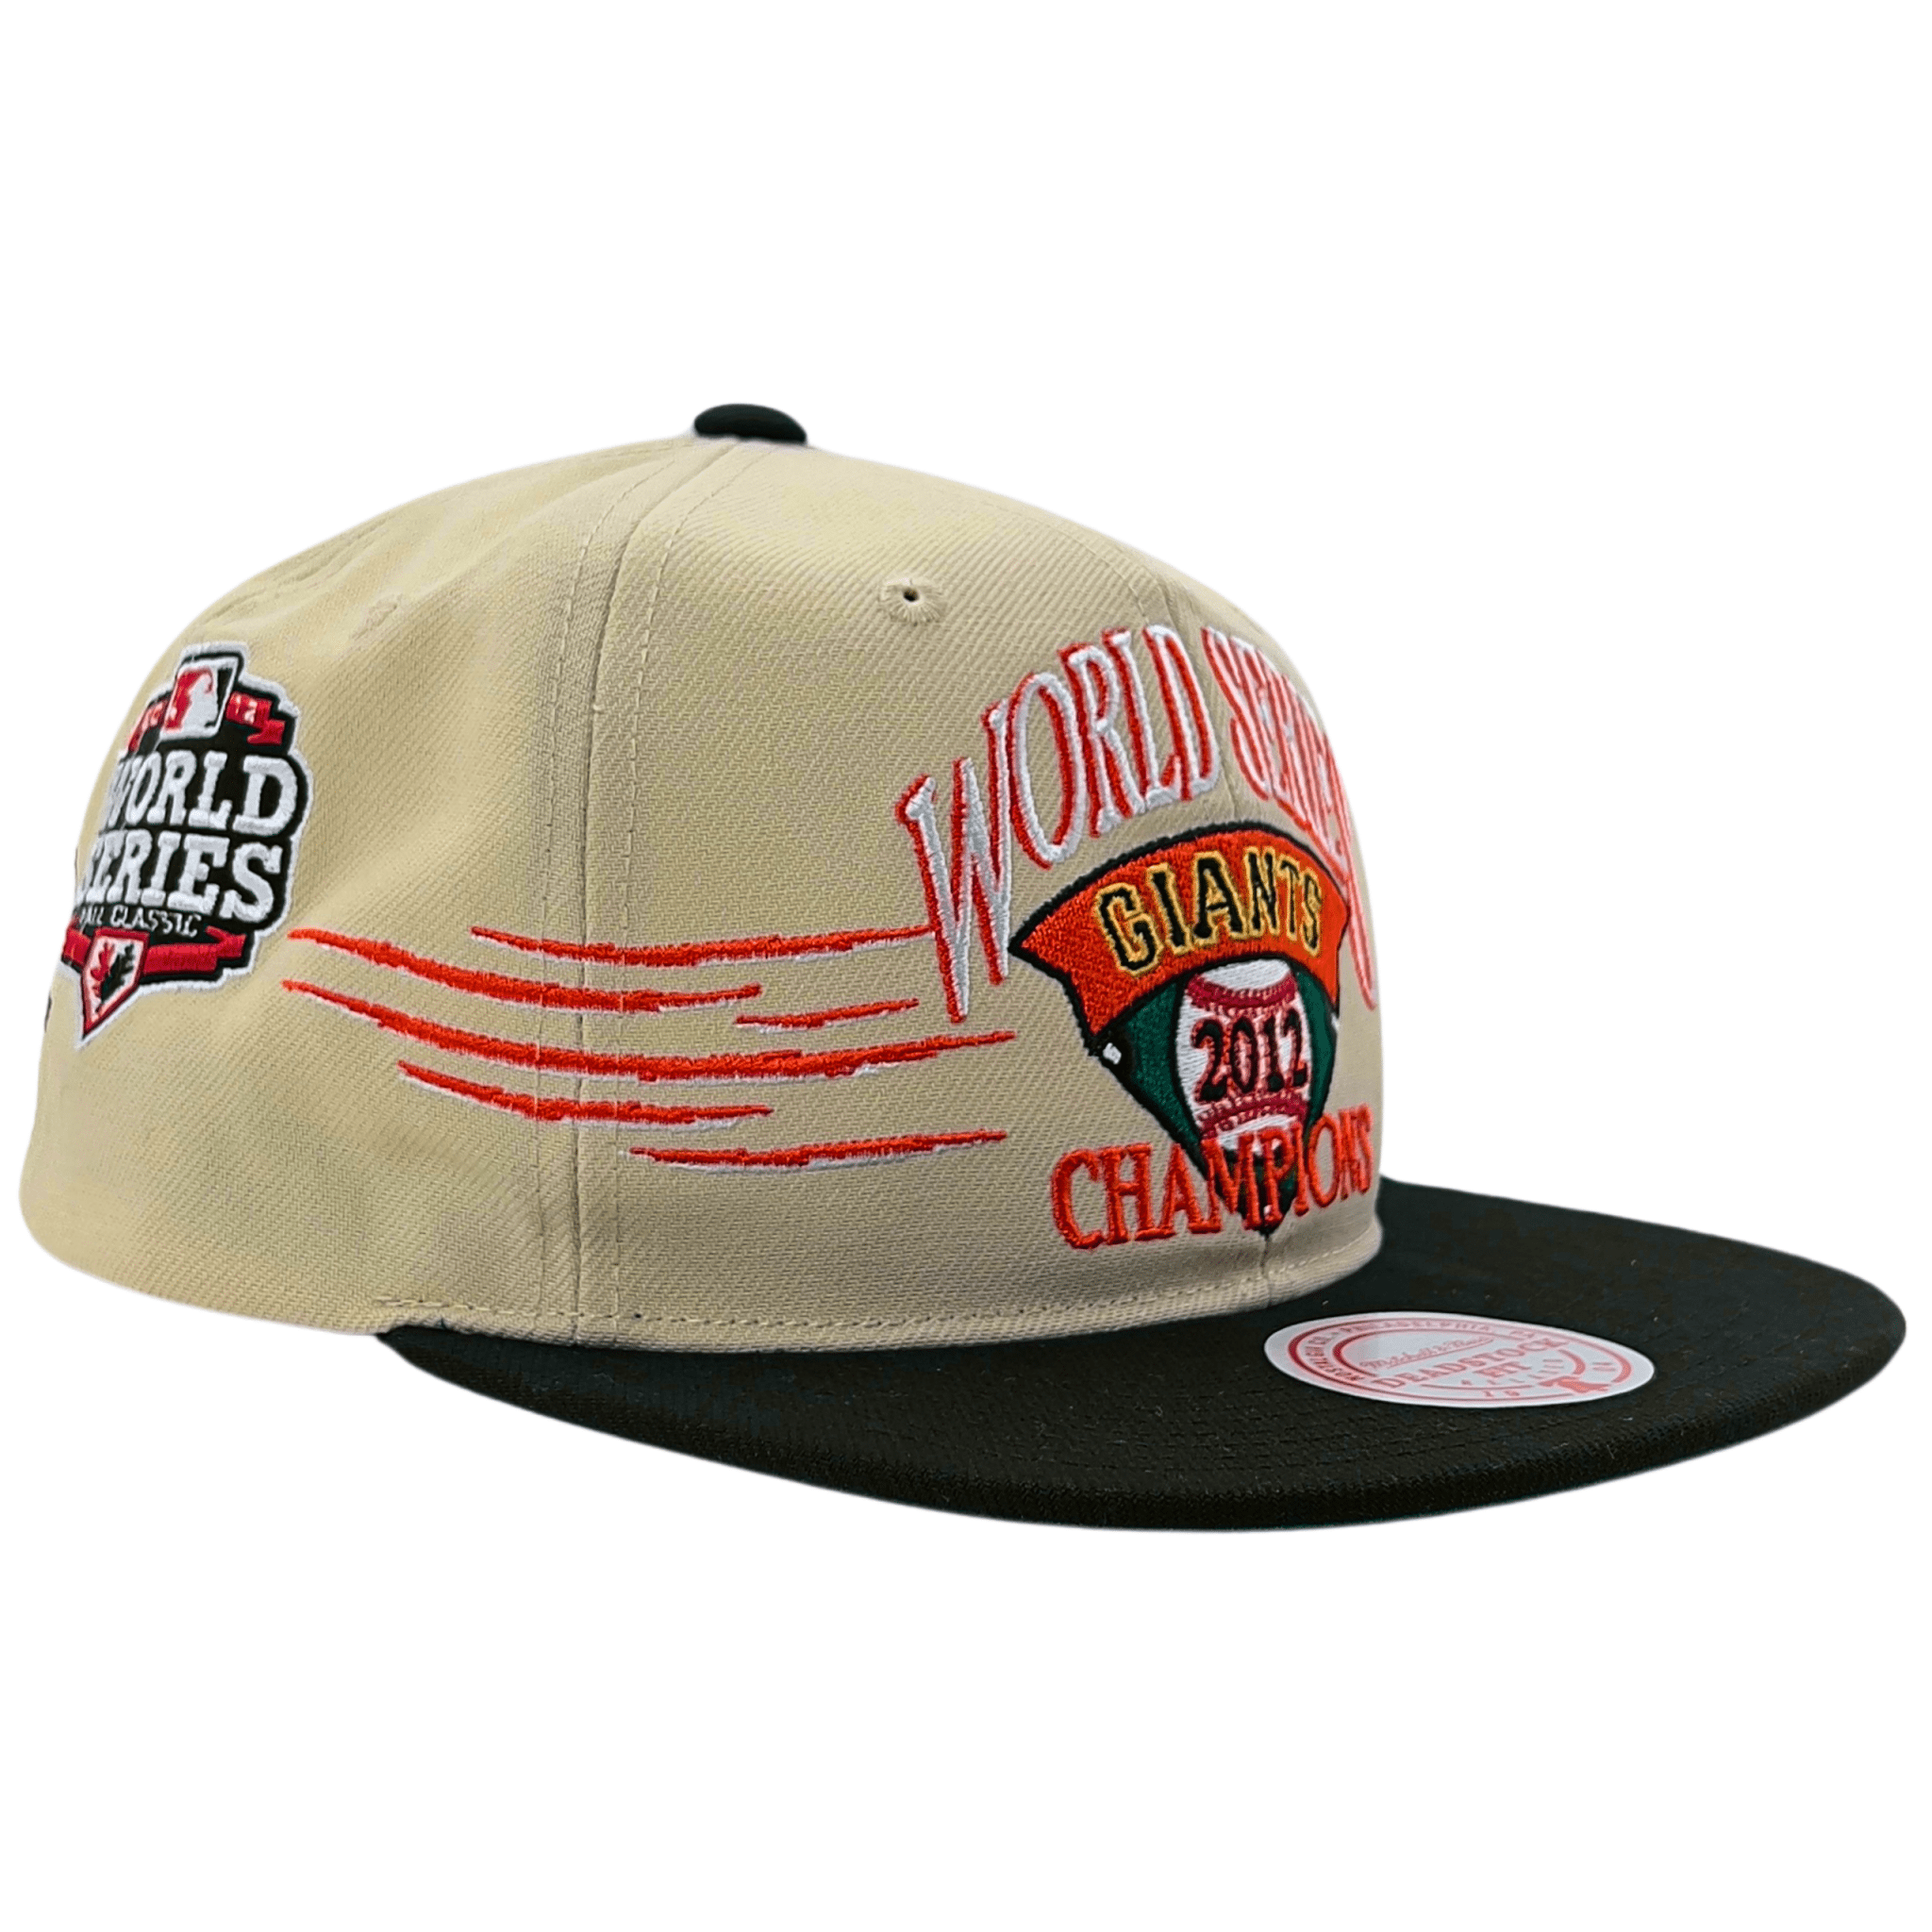 San Francisco Giants Out of the Park Snapback Hat in off white and black